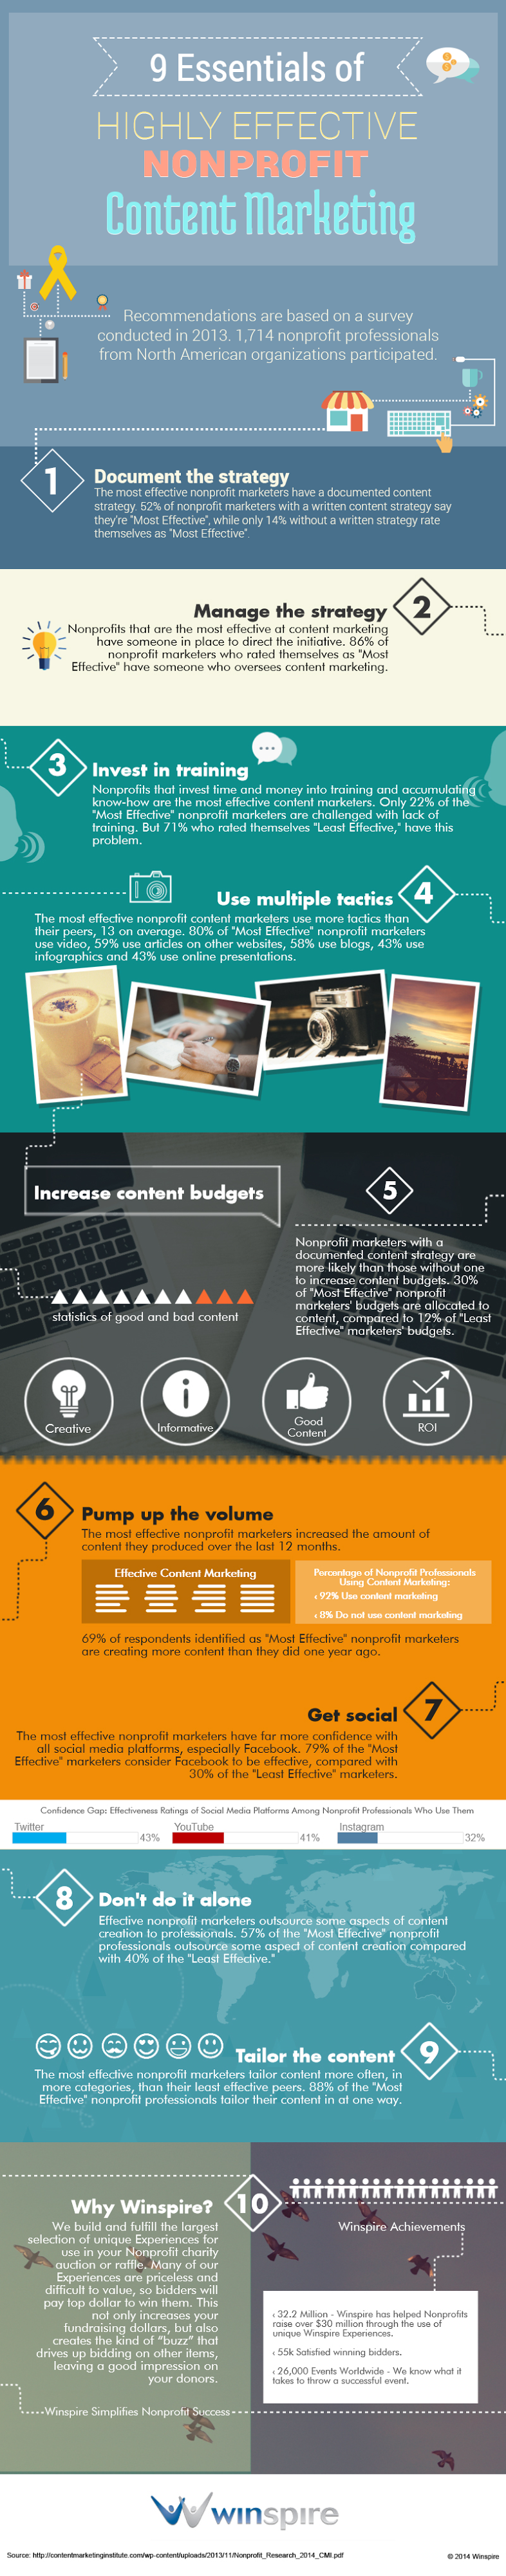 9 Essentials of Highly Effective Nonprofit Content Marketing #infographic